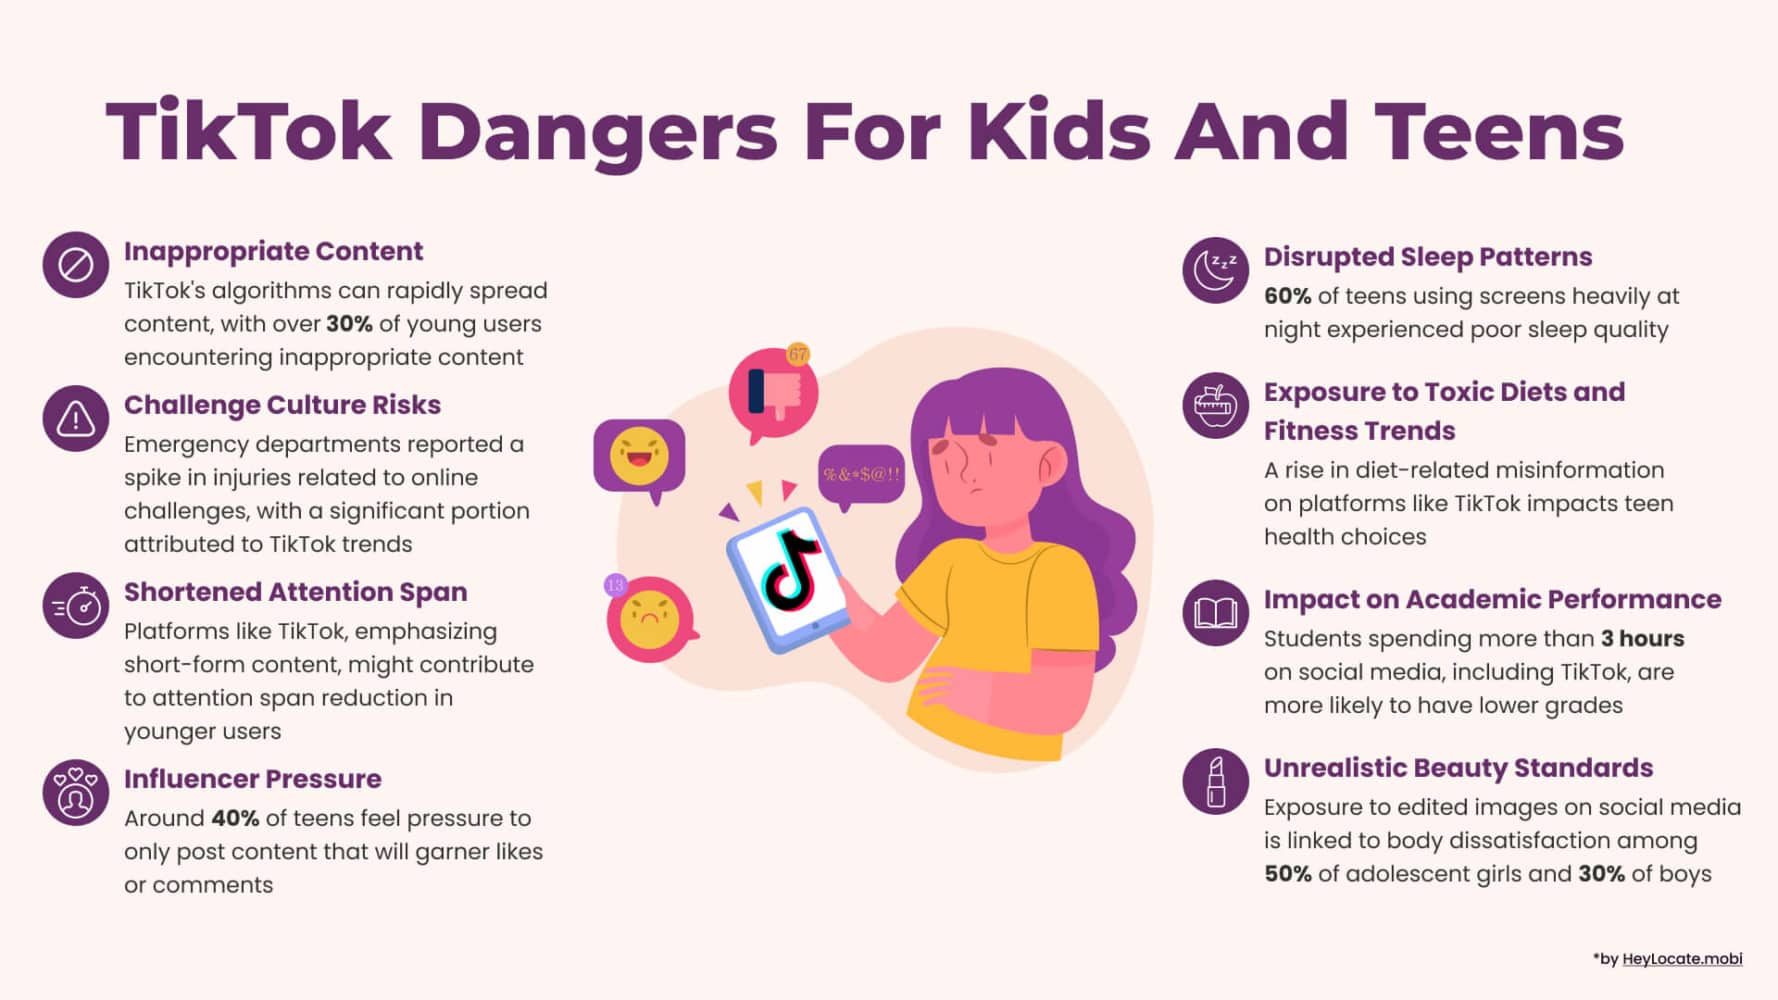 List of TikTok dangers for kids and teens showed on the infographic by HeyLocate.mobi